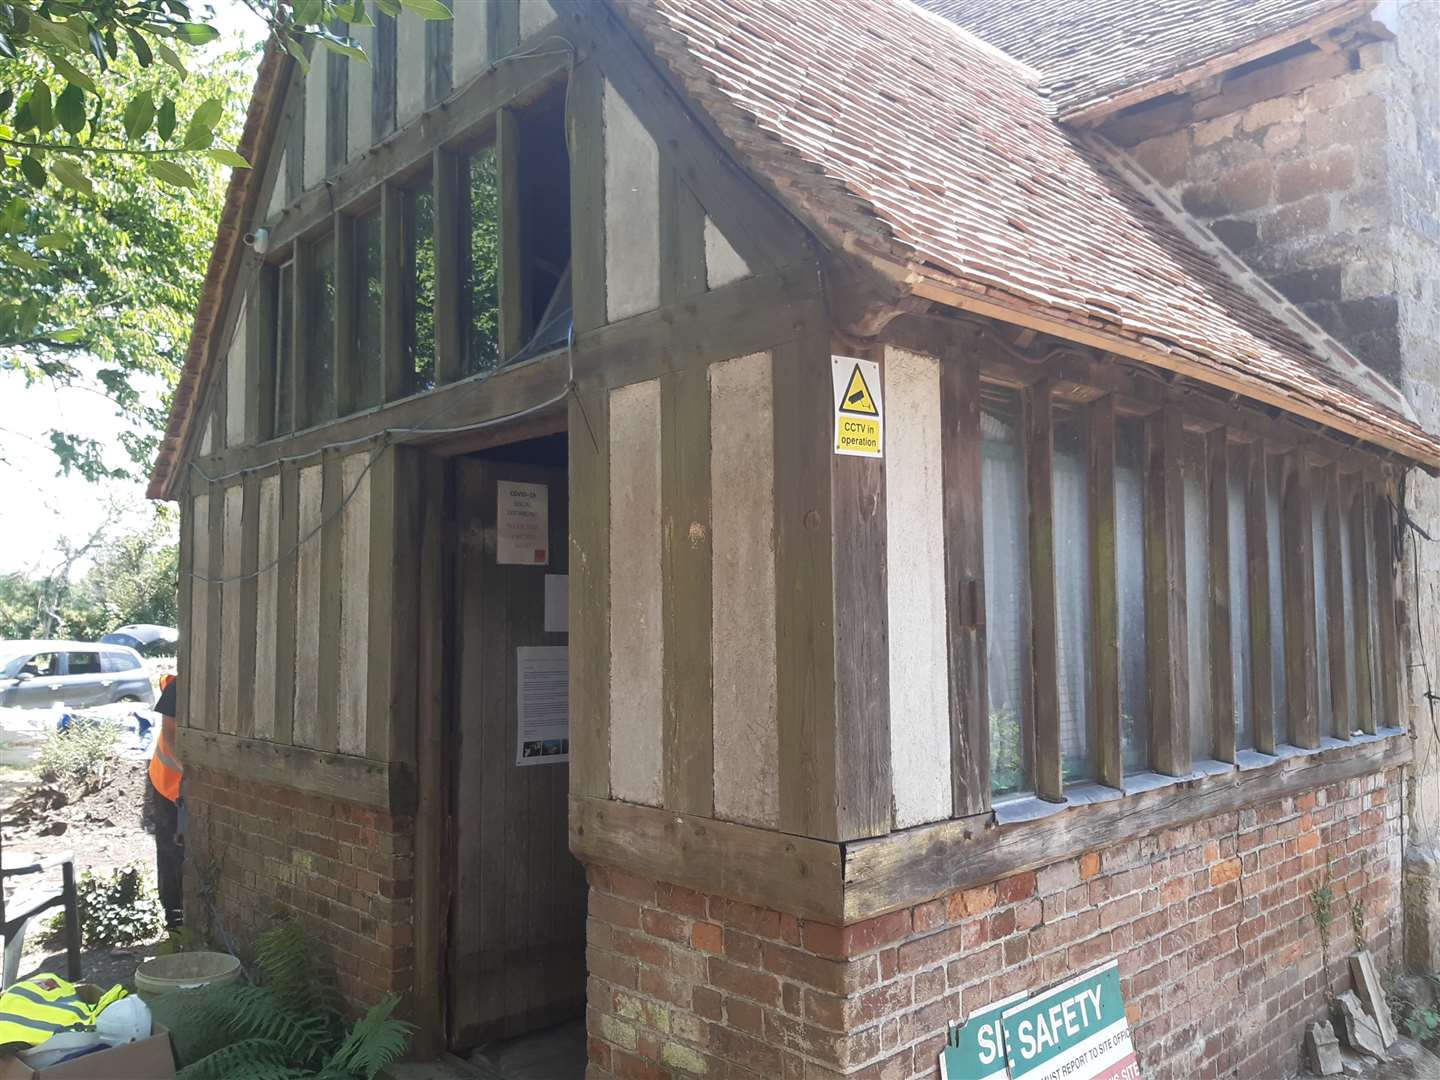 This wooden-framed extension to the old chapel became Sandling Post Office